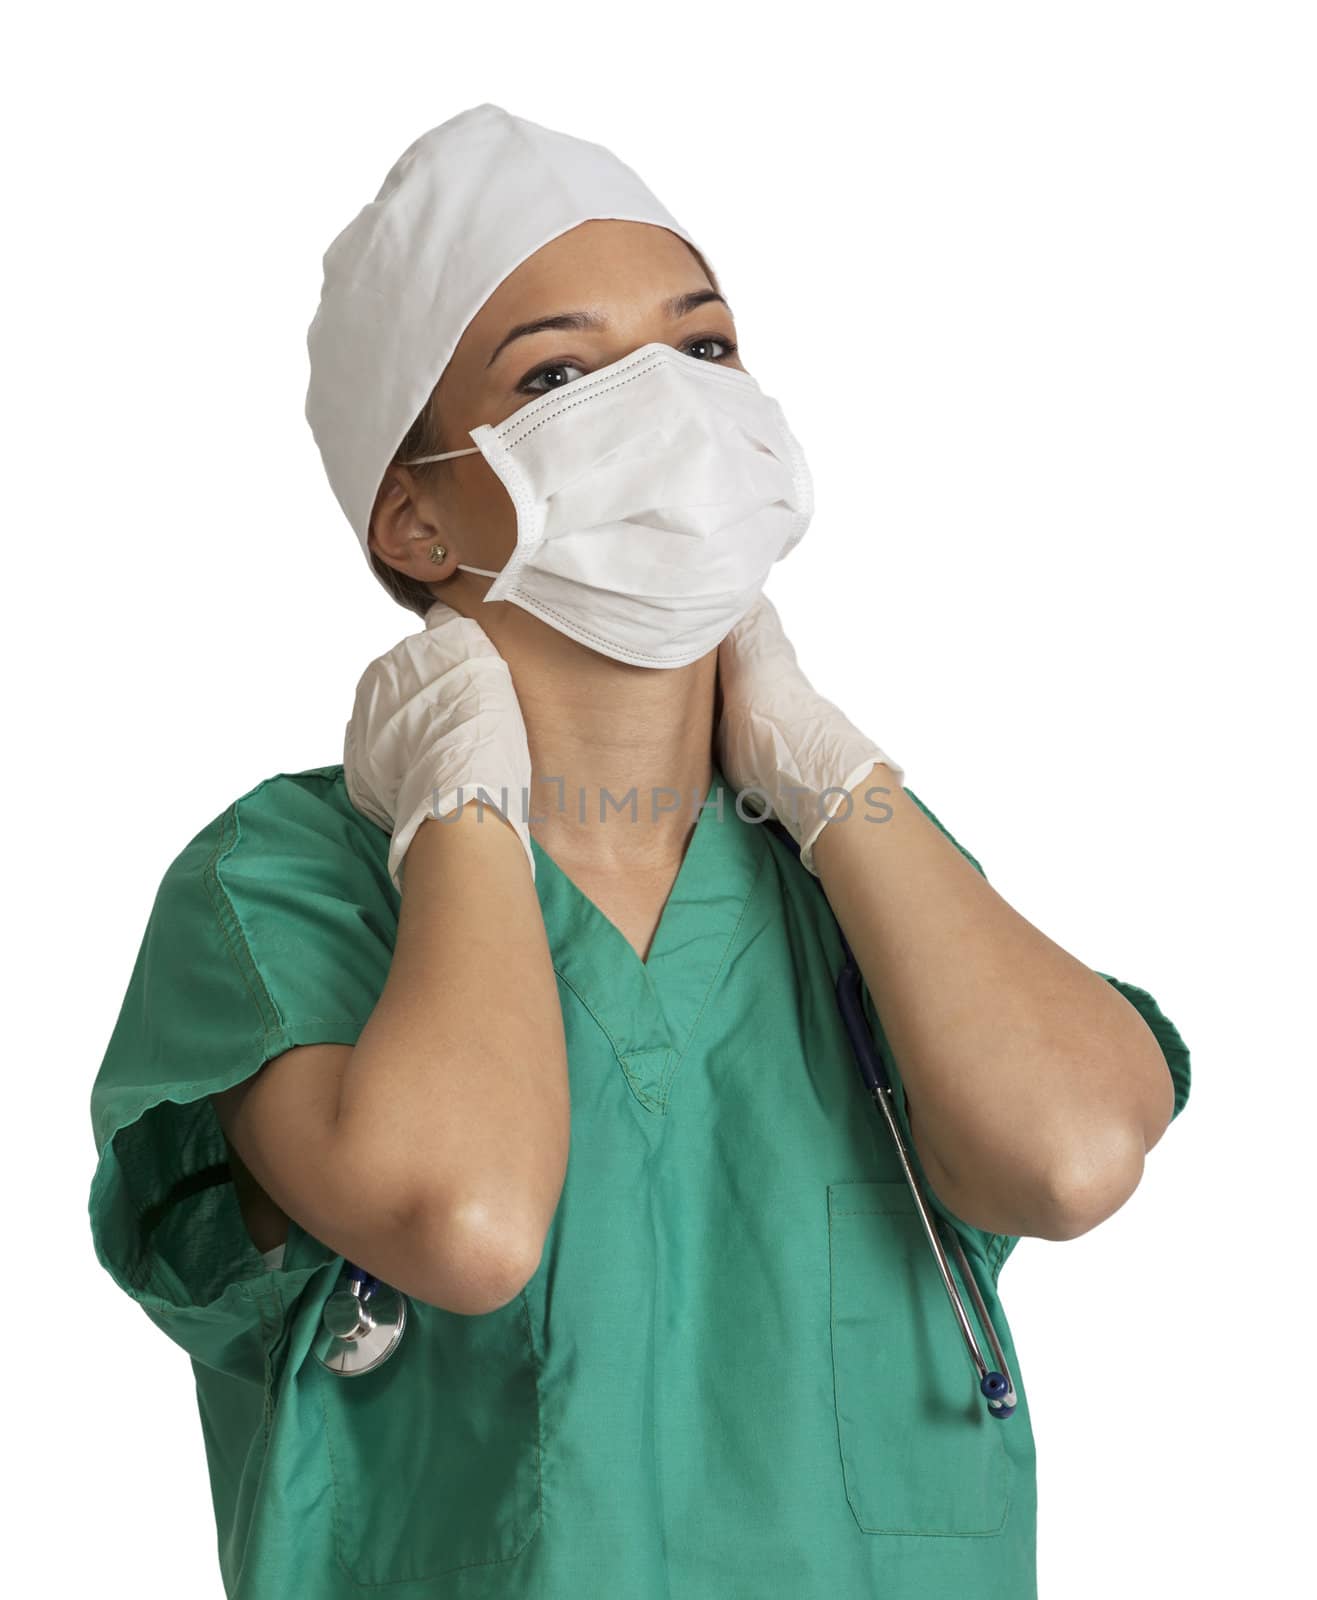 Female doctor massaging her nape with a tired attitude,isolated against a white background.